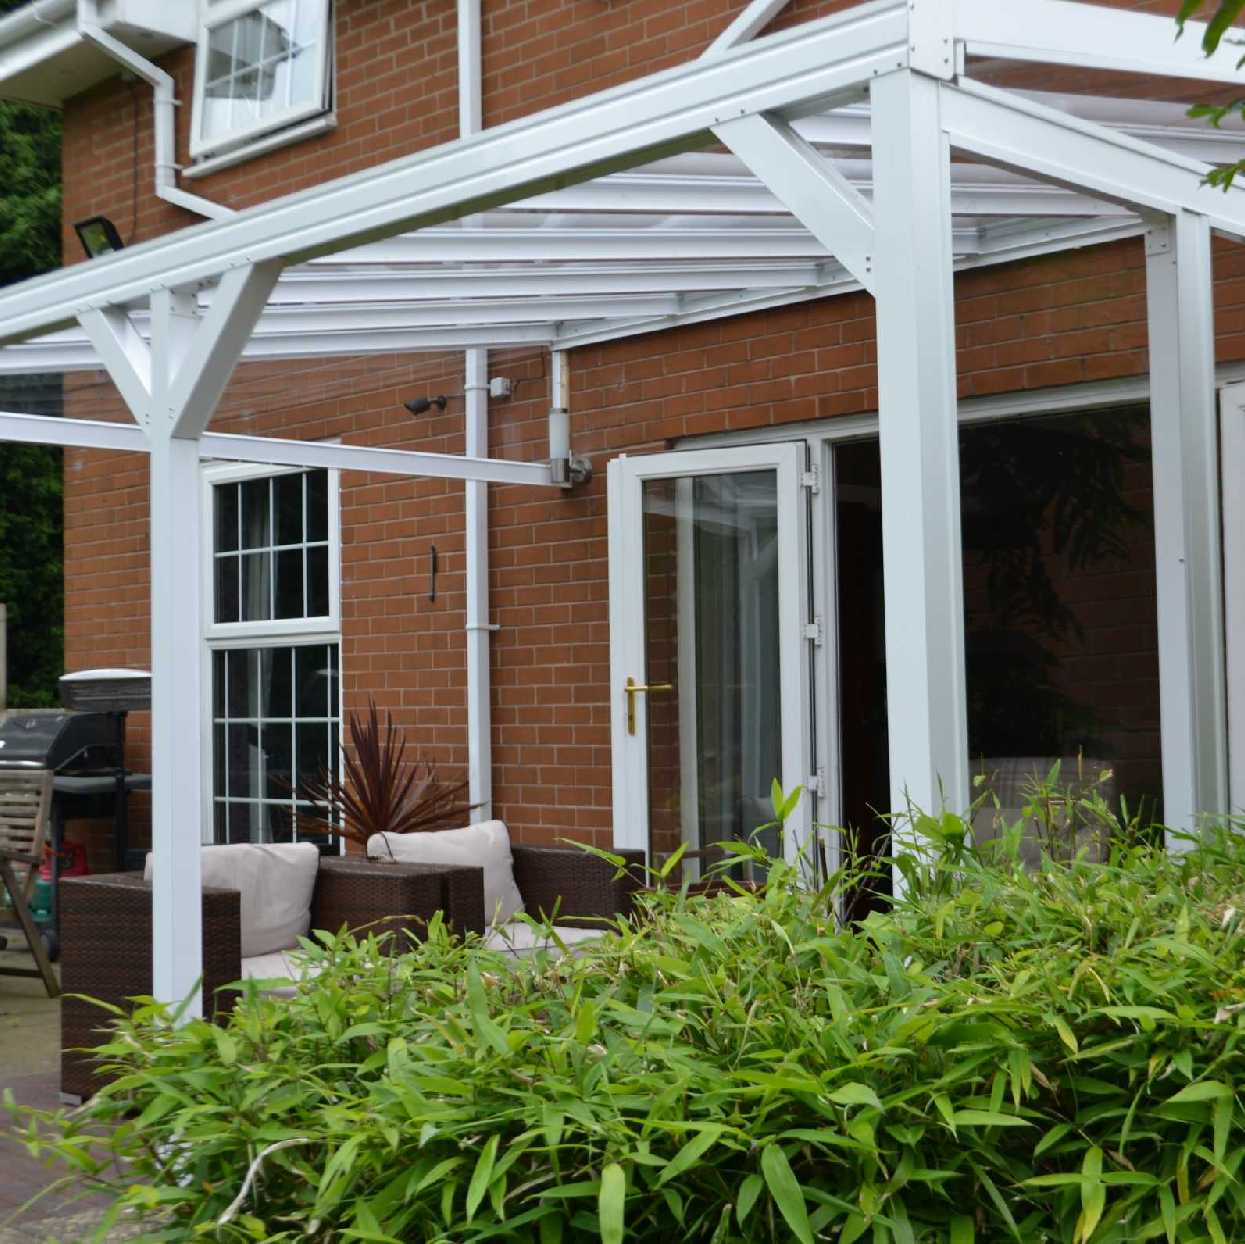 Omega Smart Lean-To Canopy, White UNGLAZED for 6mm Glazing - 2.8m (W) x 2.0m (P), (2) Supporting Posts from Omega Build